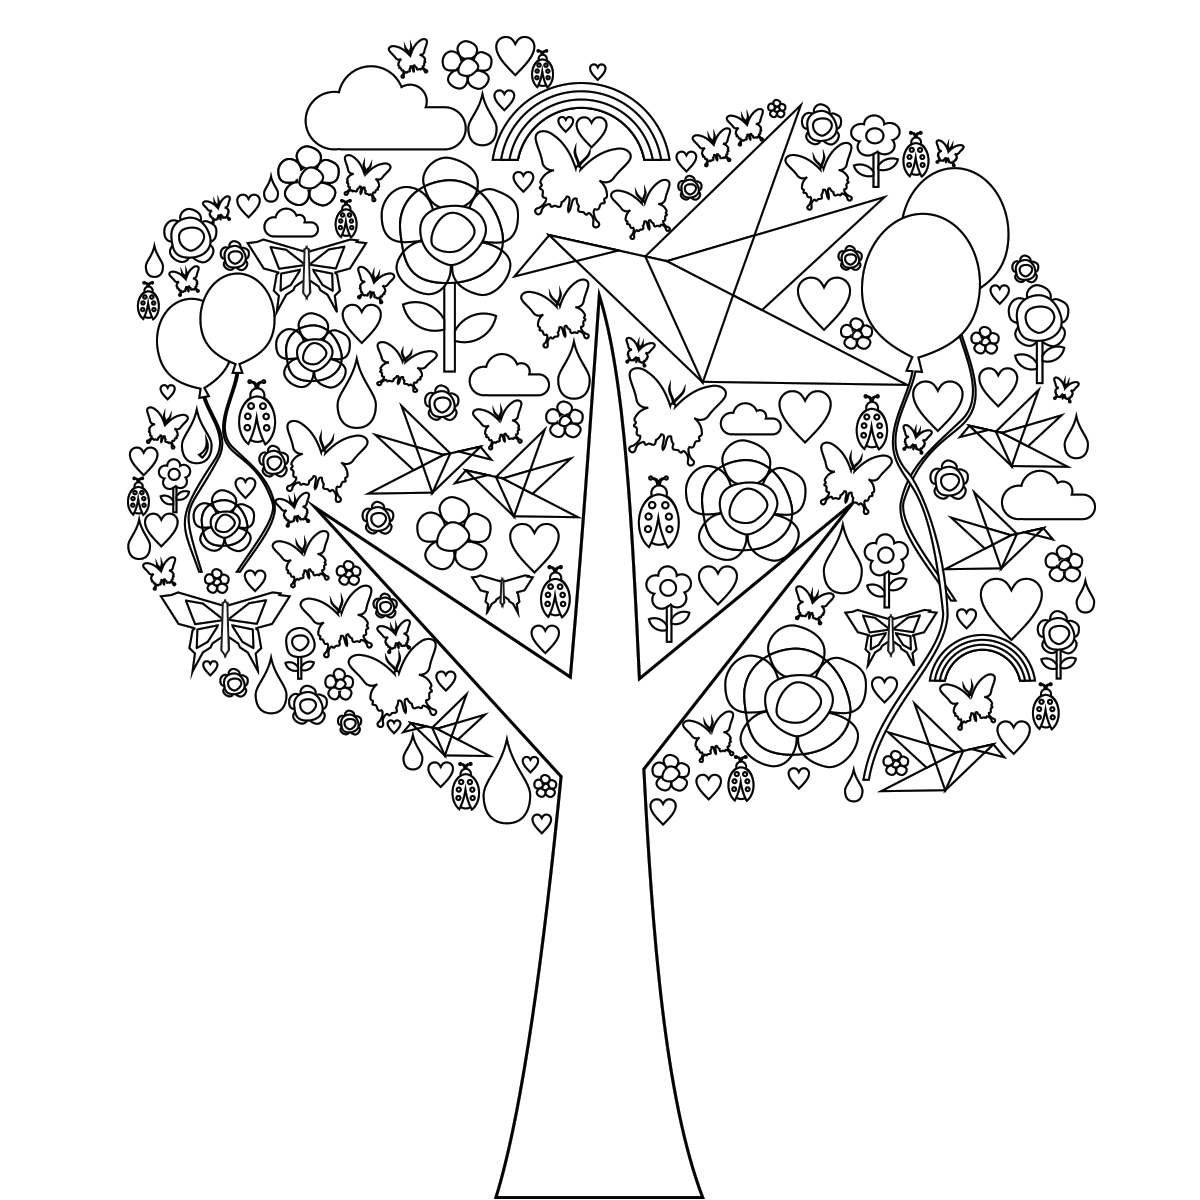 Tree of Life Coloring Page